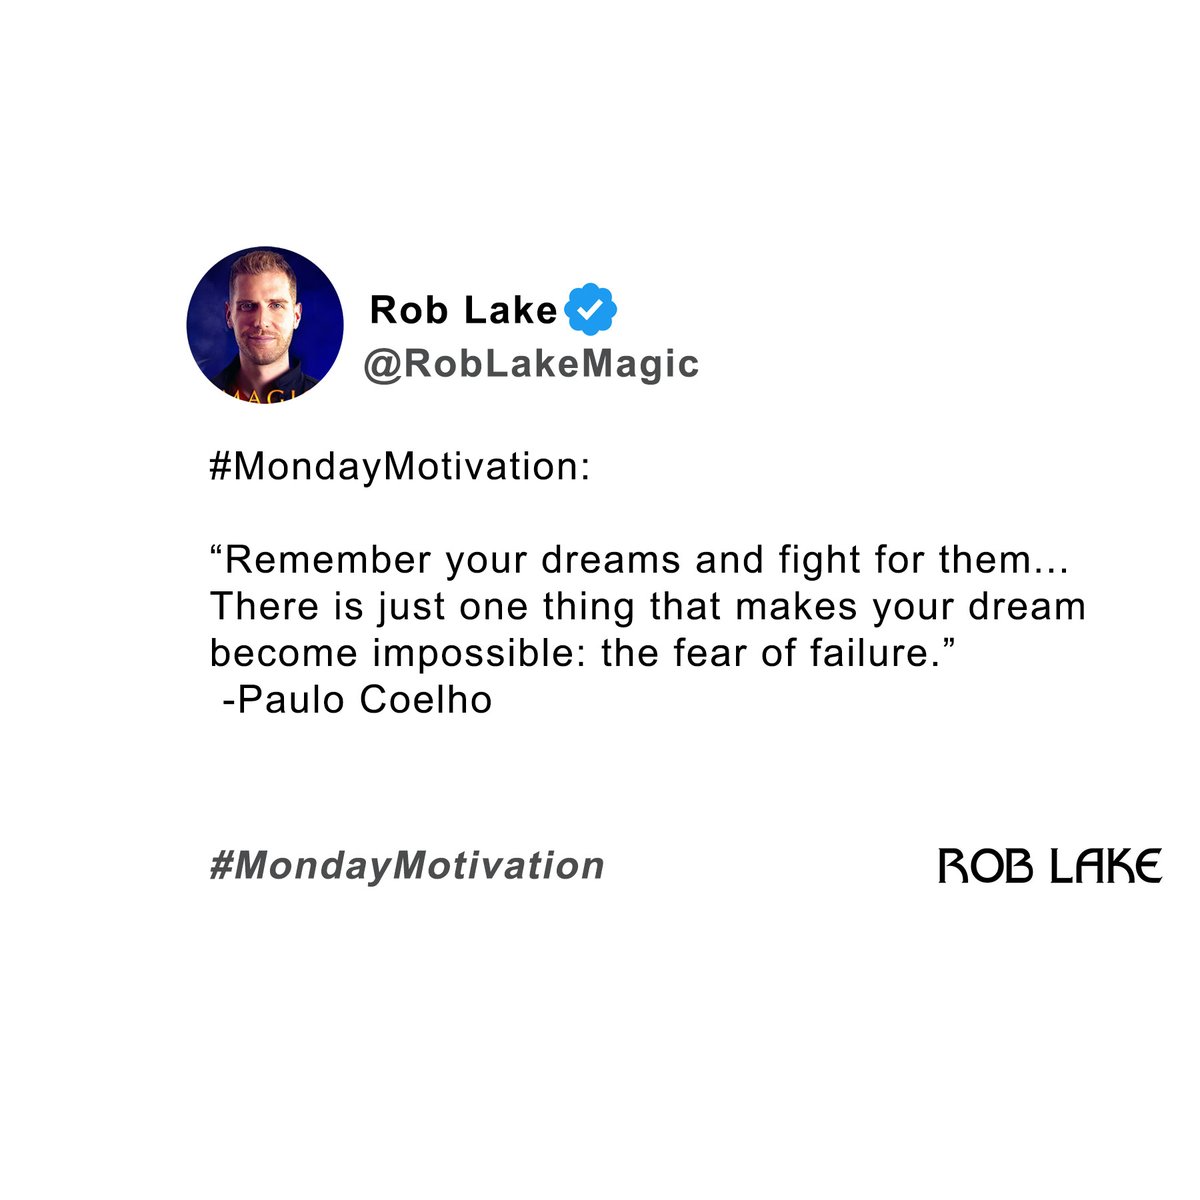 #MondayMotivation 'Remember your dreams and fight for them... There is just one thing that makes your dream become impossible: the fear of failure.' -Paulo Coelho